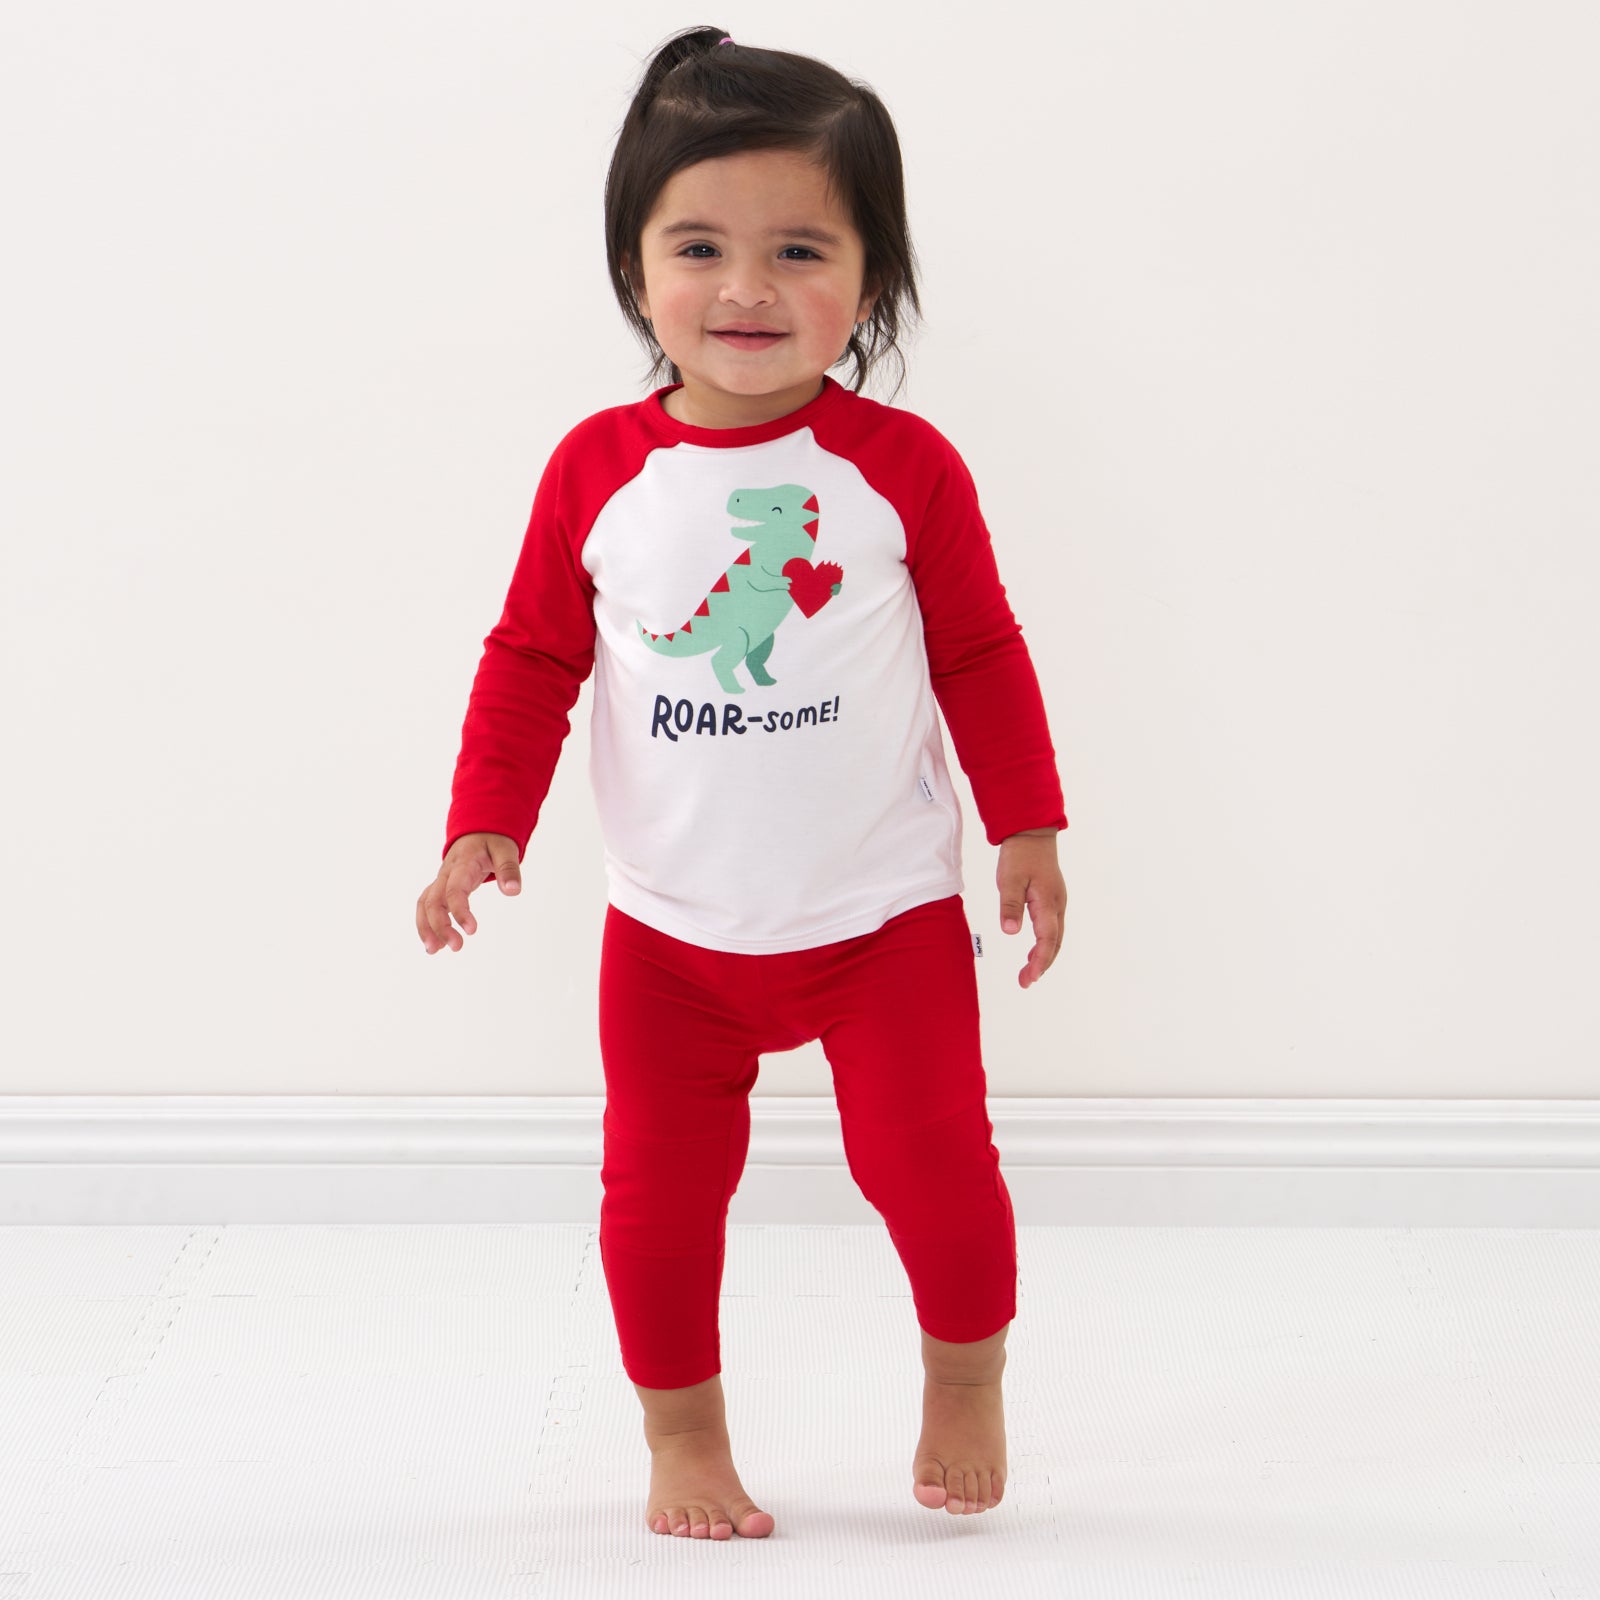 Child wearing Candy Red leggings and coordinating top